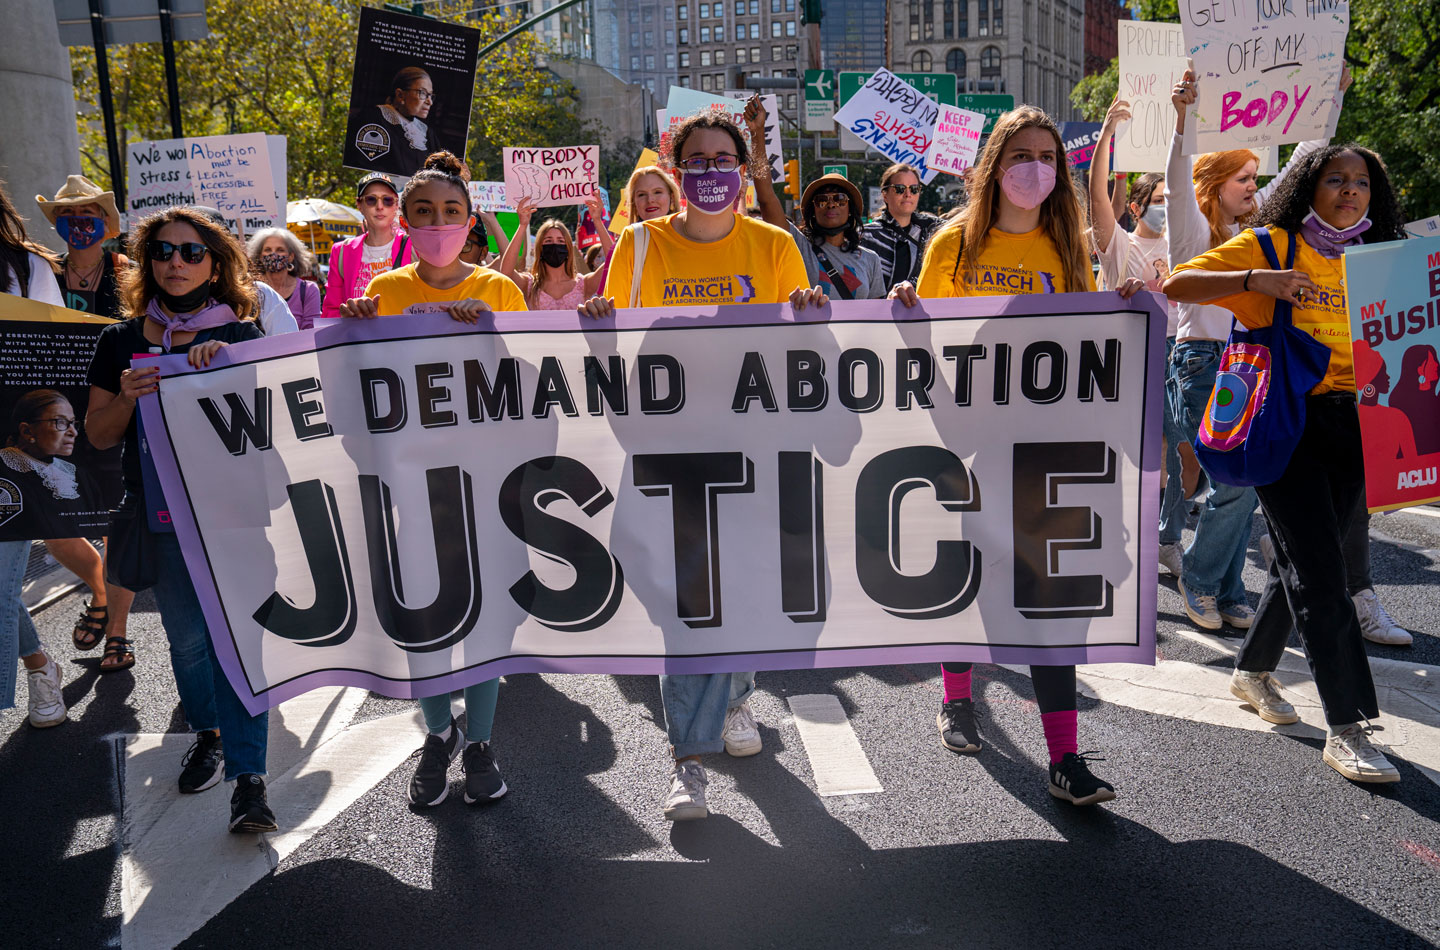 Strange Bedfellows: Abortion and White Supremacy